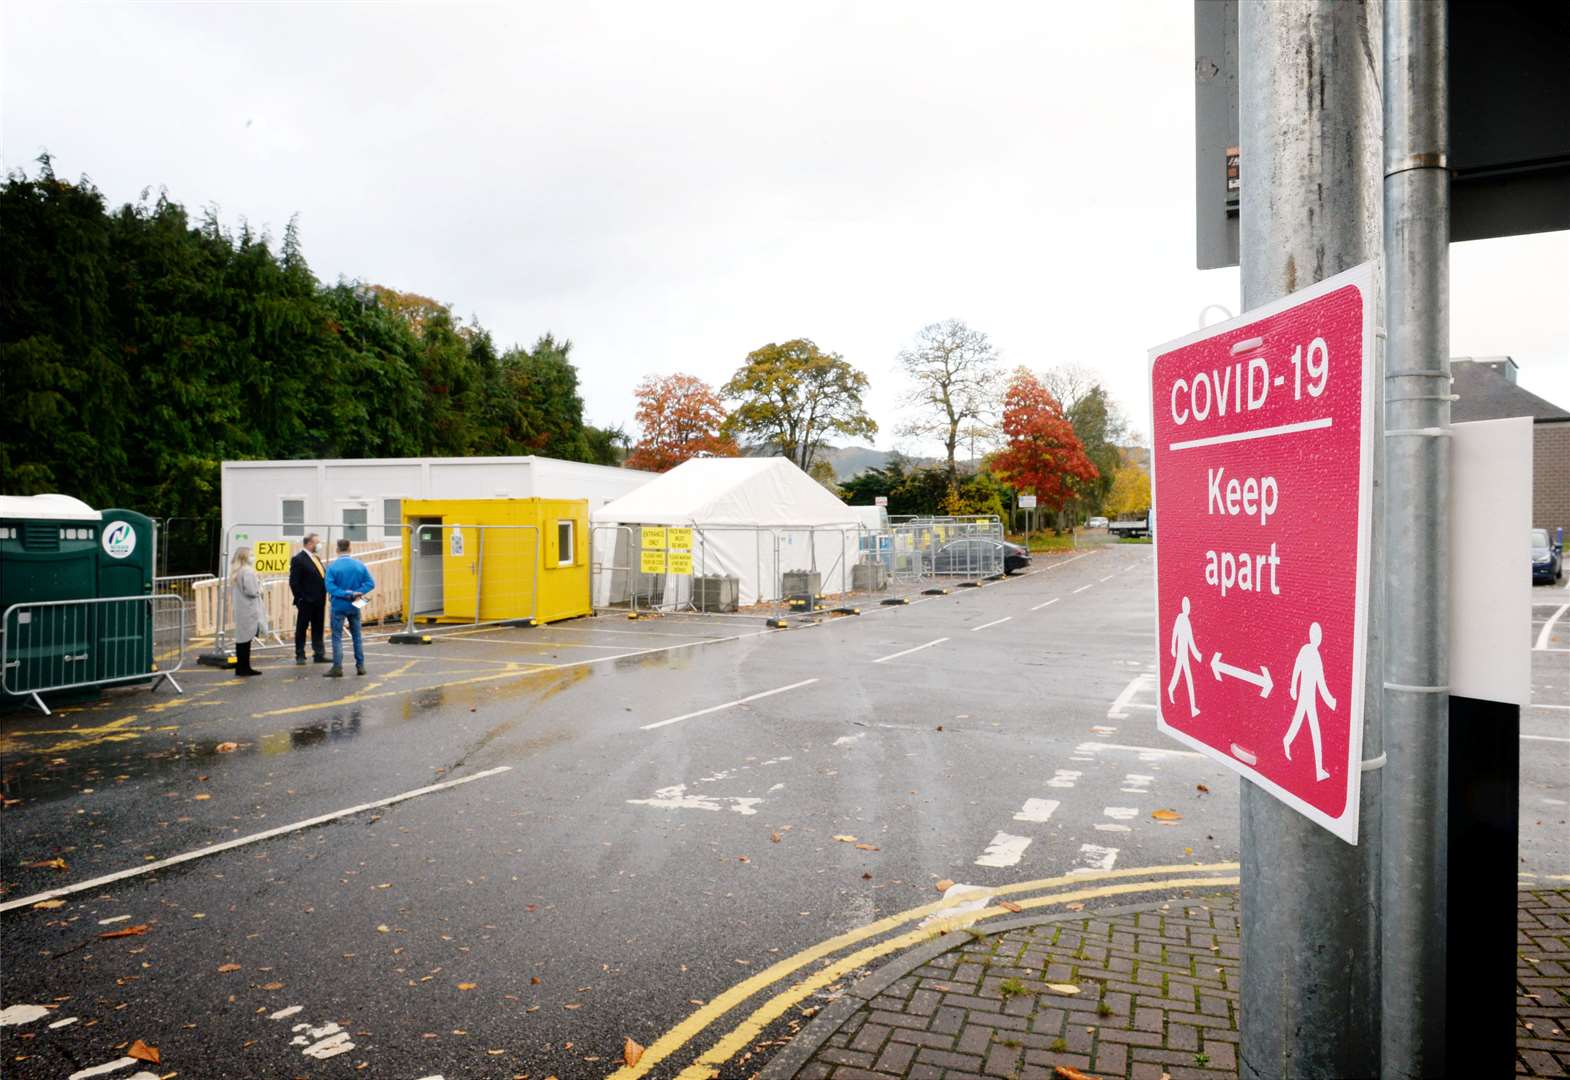 A new walk-in Covid-19 testing centre opened in the Highland Council car park.